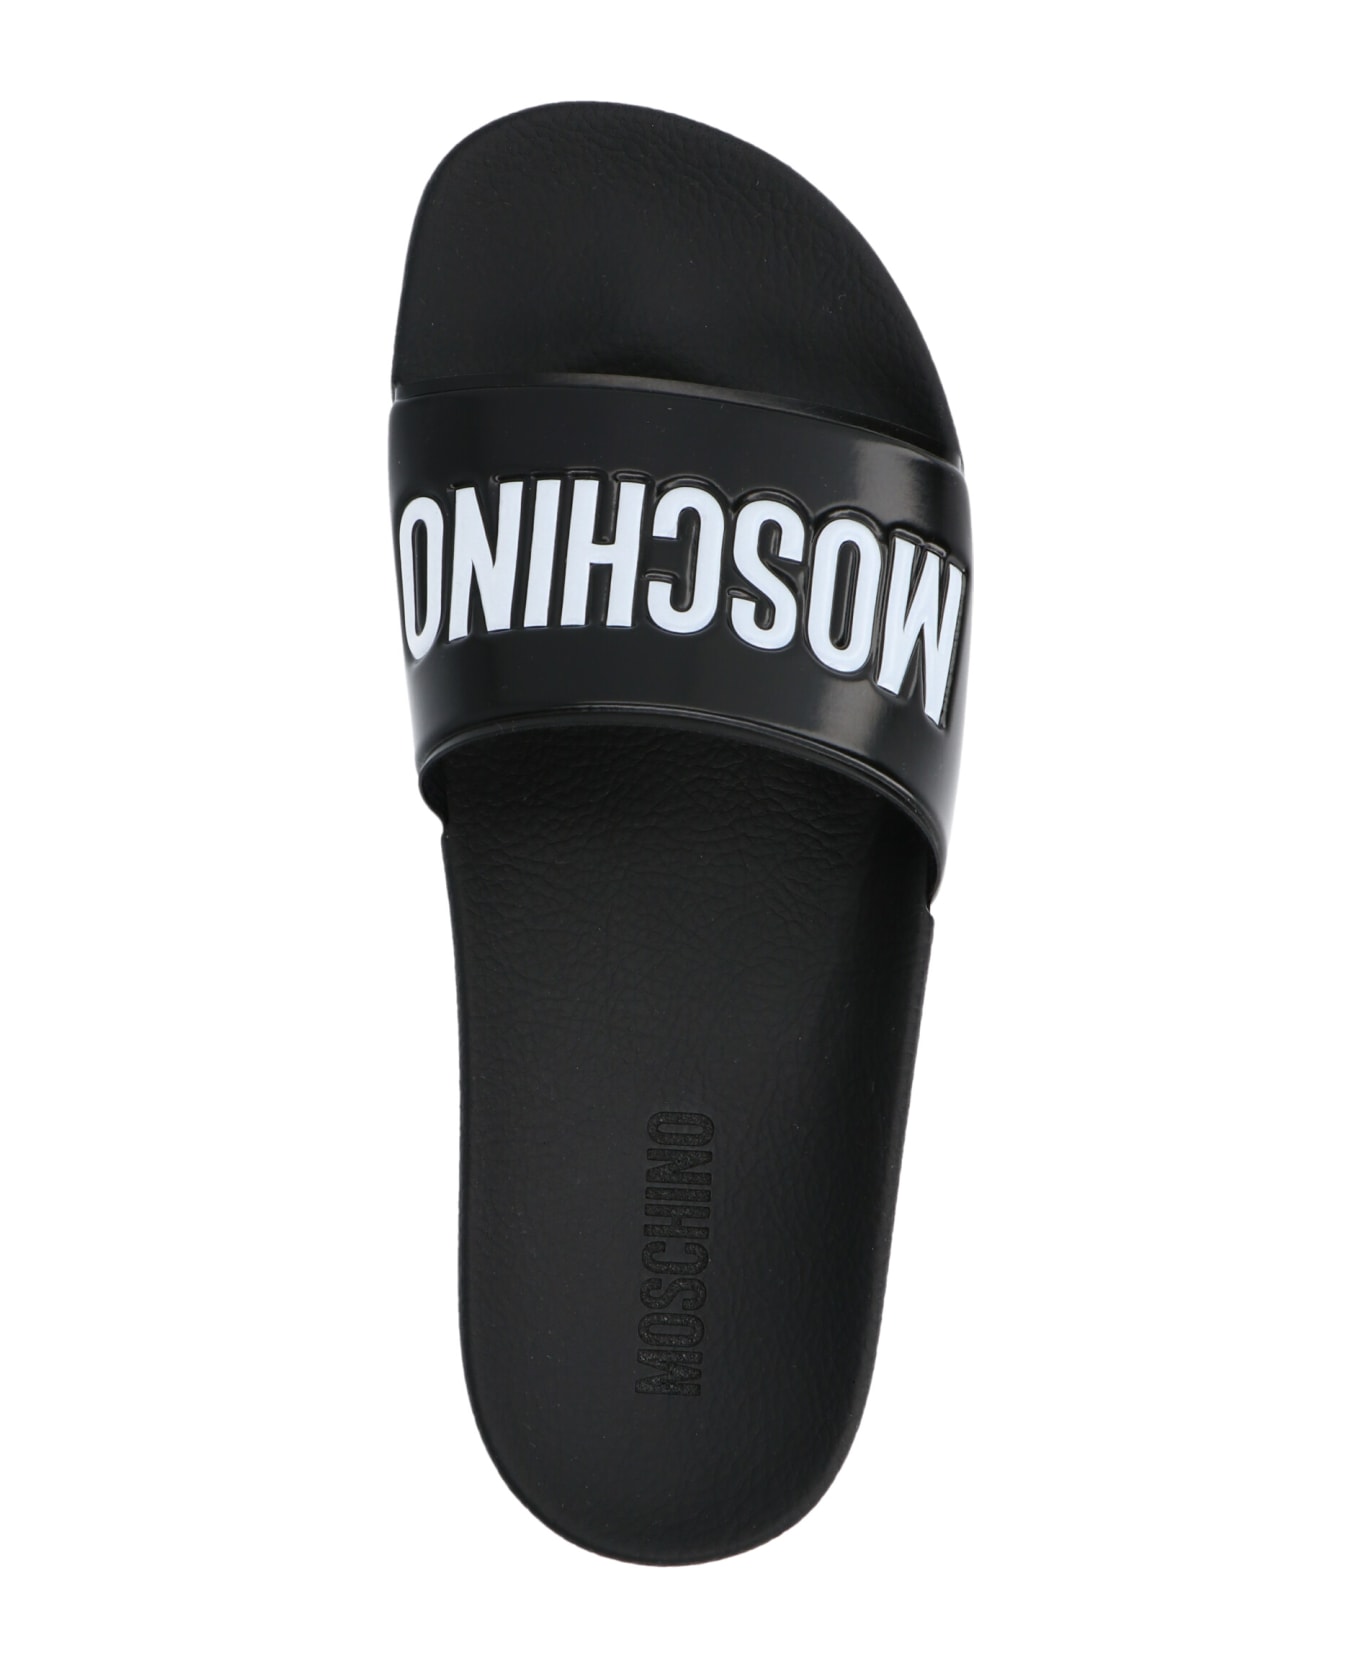 Moschino Shoes | italist